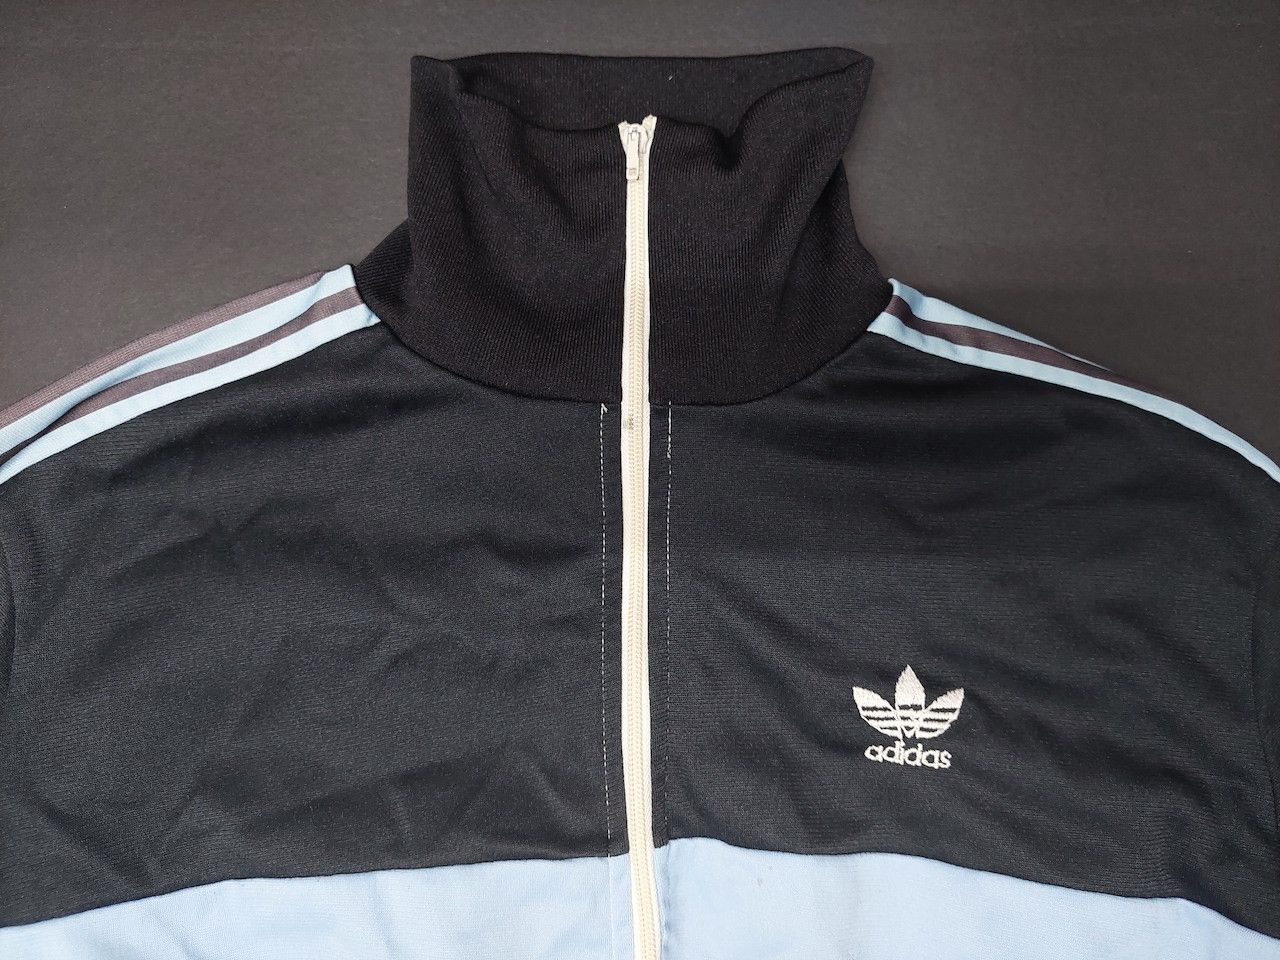 Super Vintage Adidas Tracktop Sweater Collector Items - 11